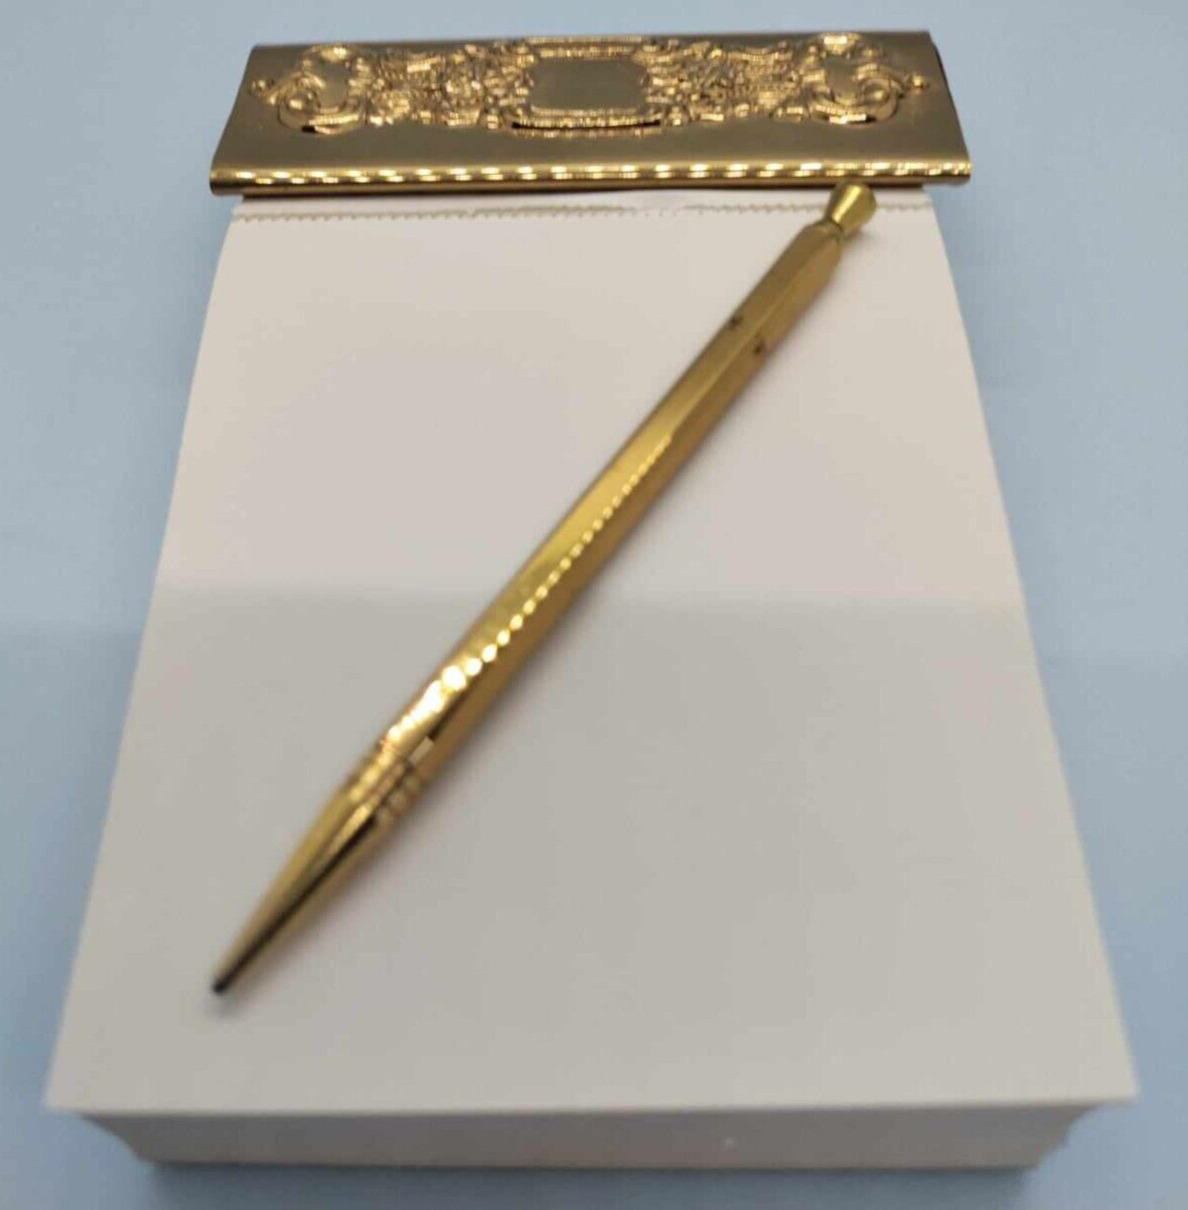  Rare VTG Stik magnetic mechanical pencil with gold toned writing / note pad